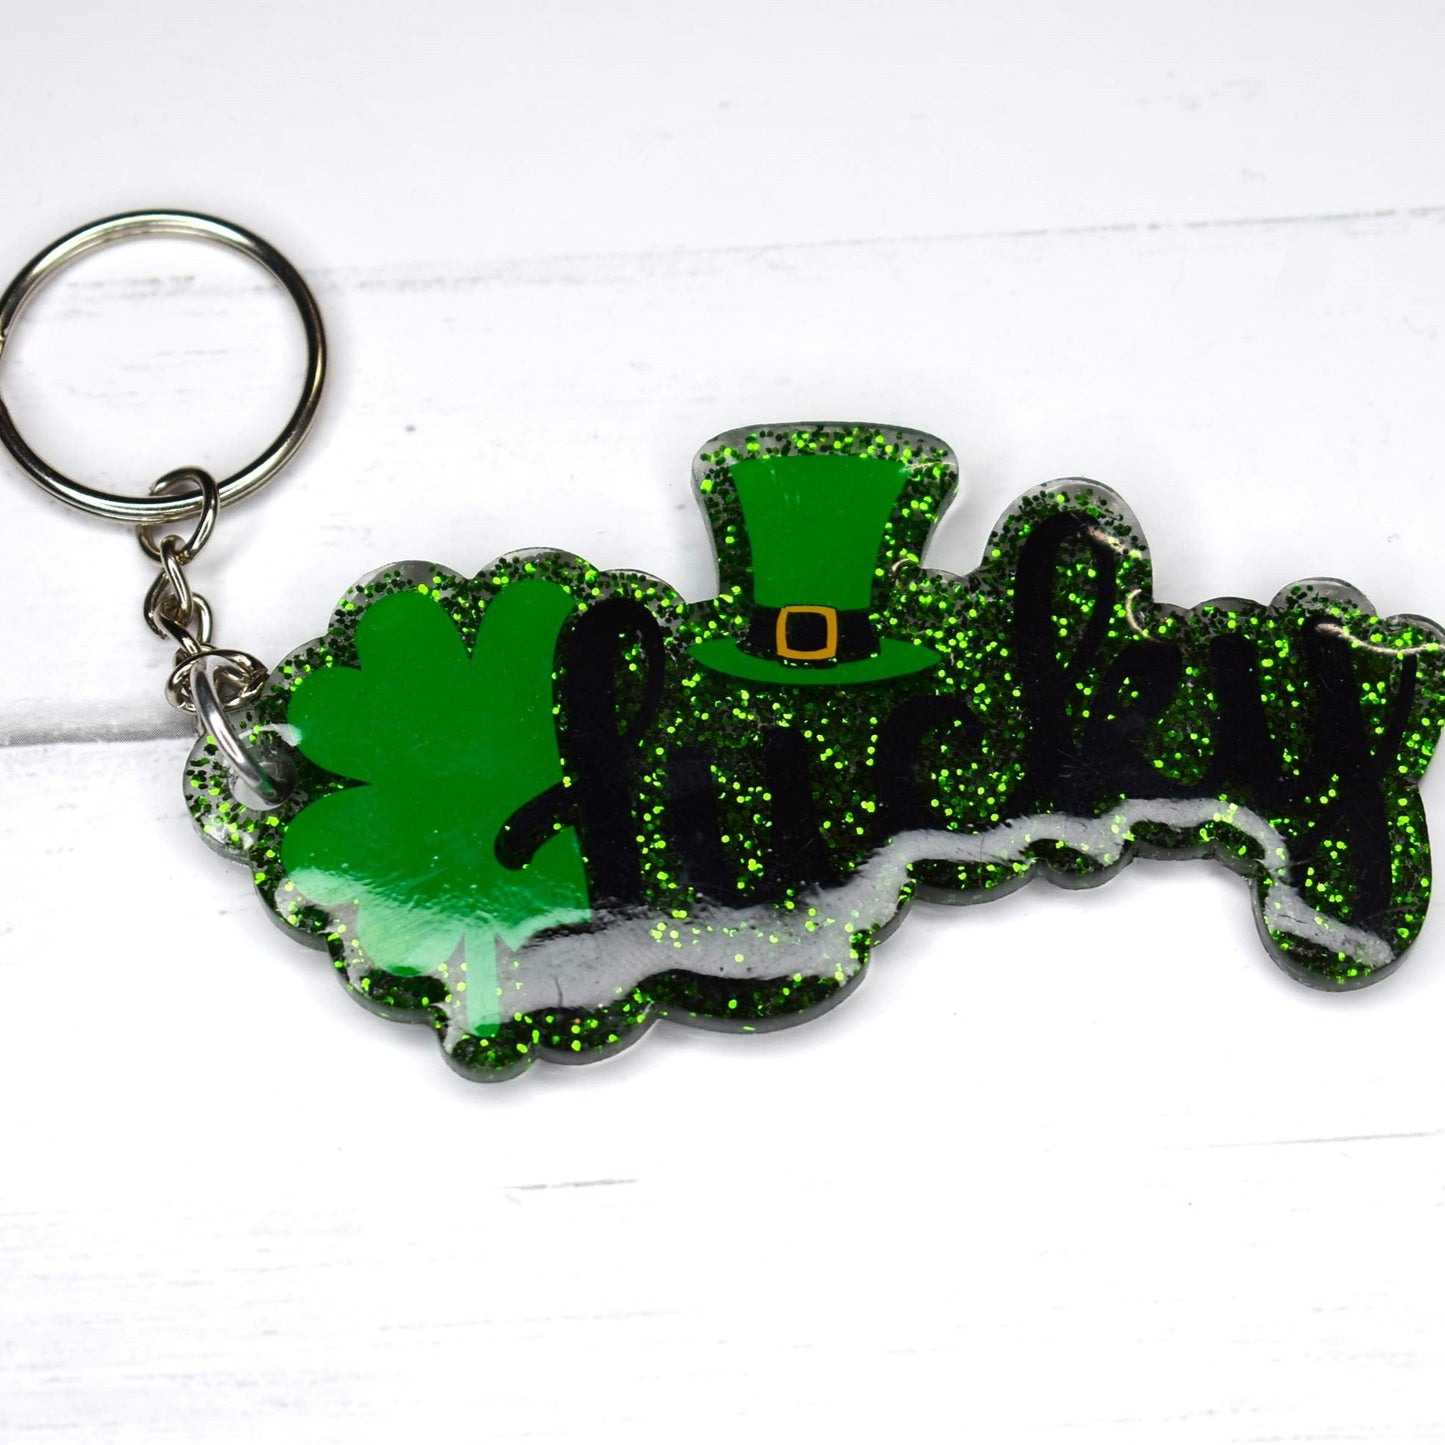 This keychain is made of acrylic resin and features a lucky Irish design. It comes in two options: a green glitter background or a sparkling clear glitter background. Show off your luck today!